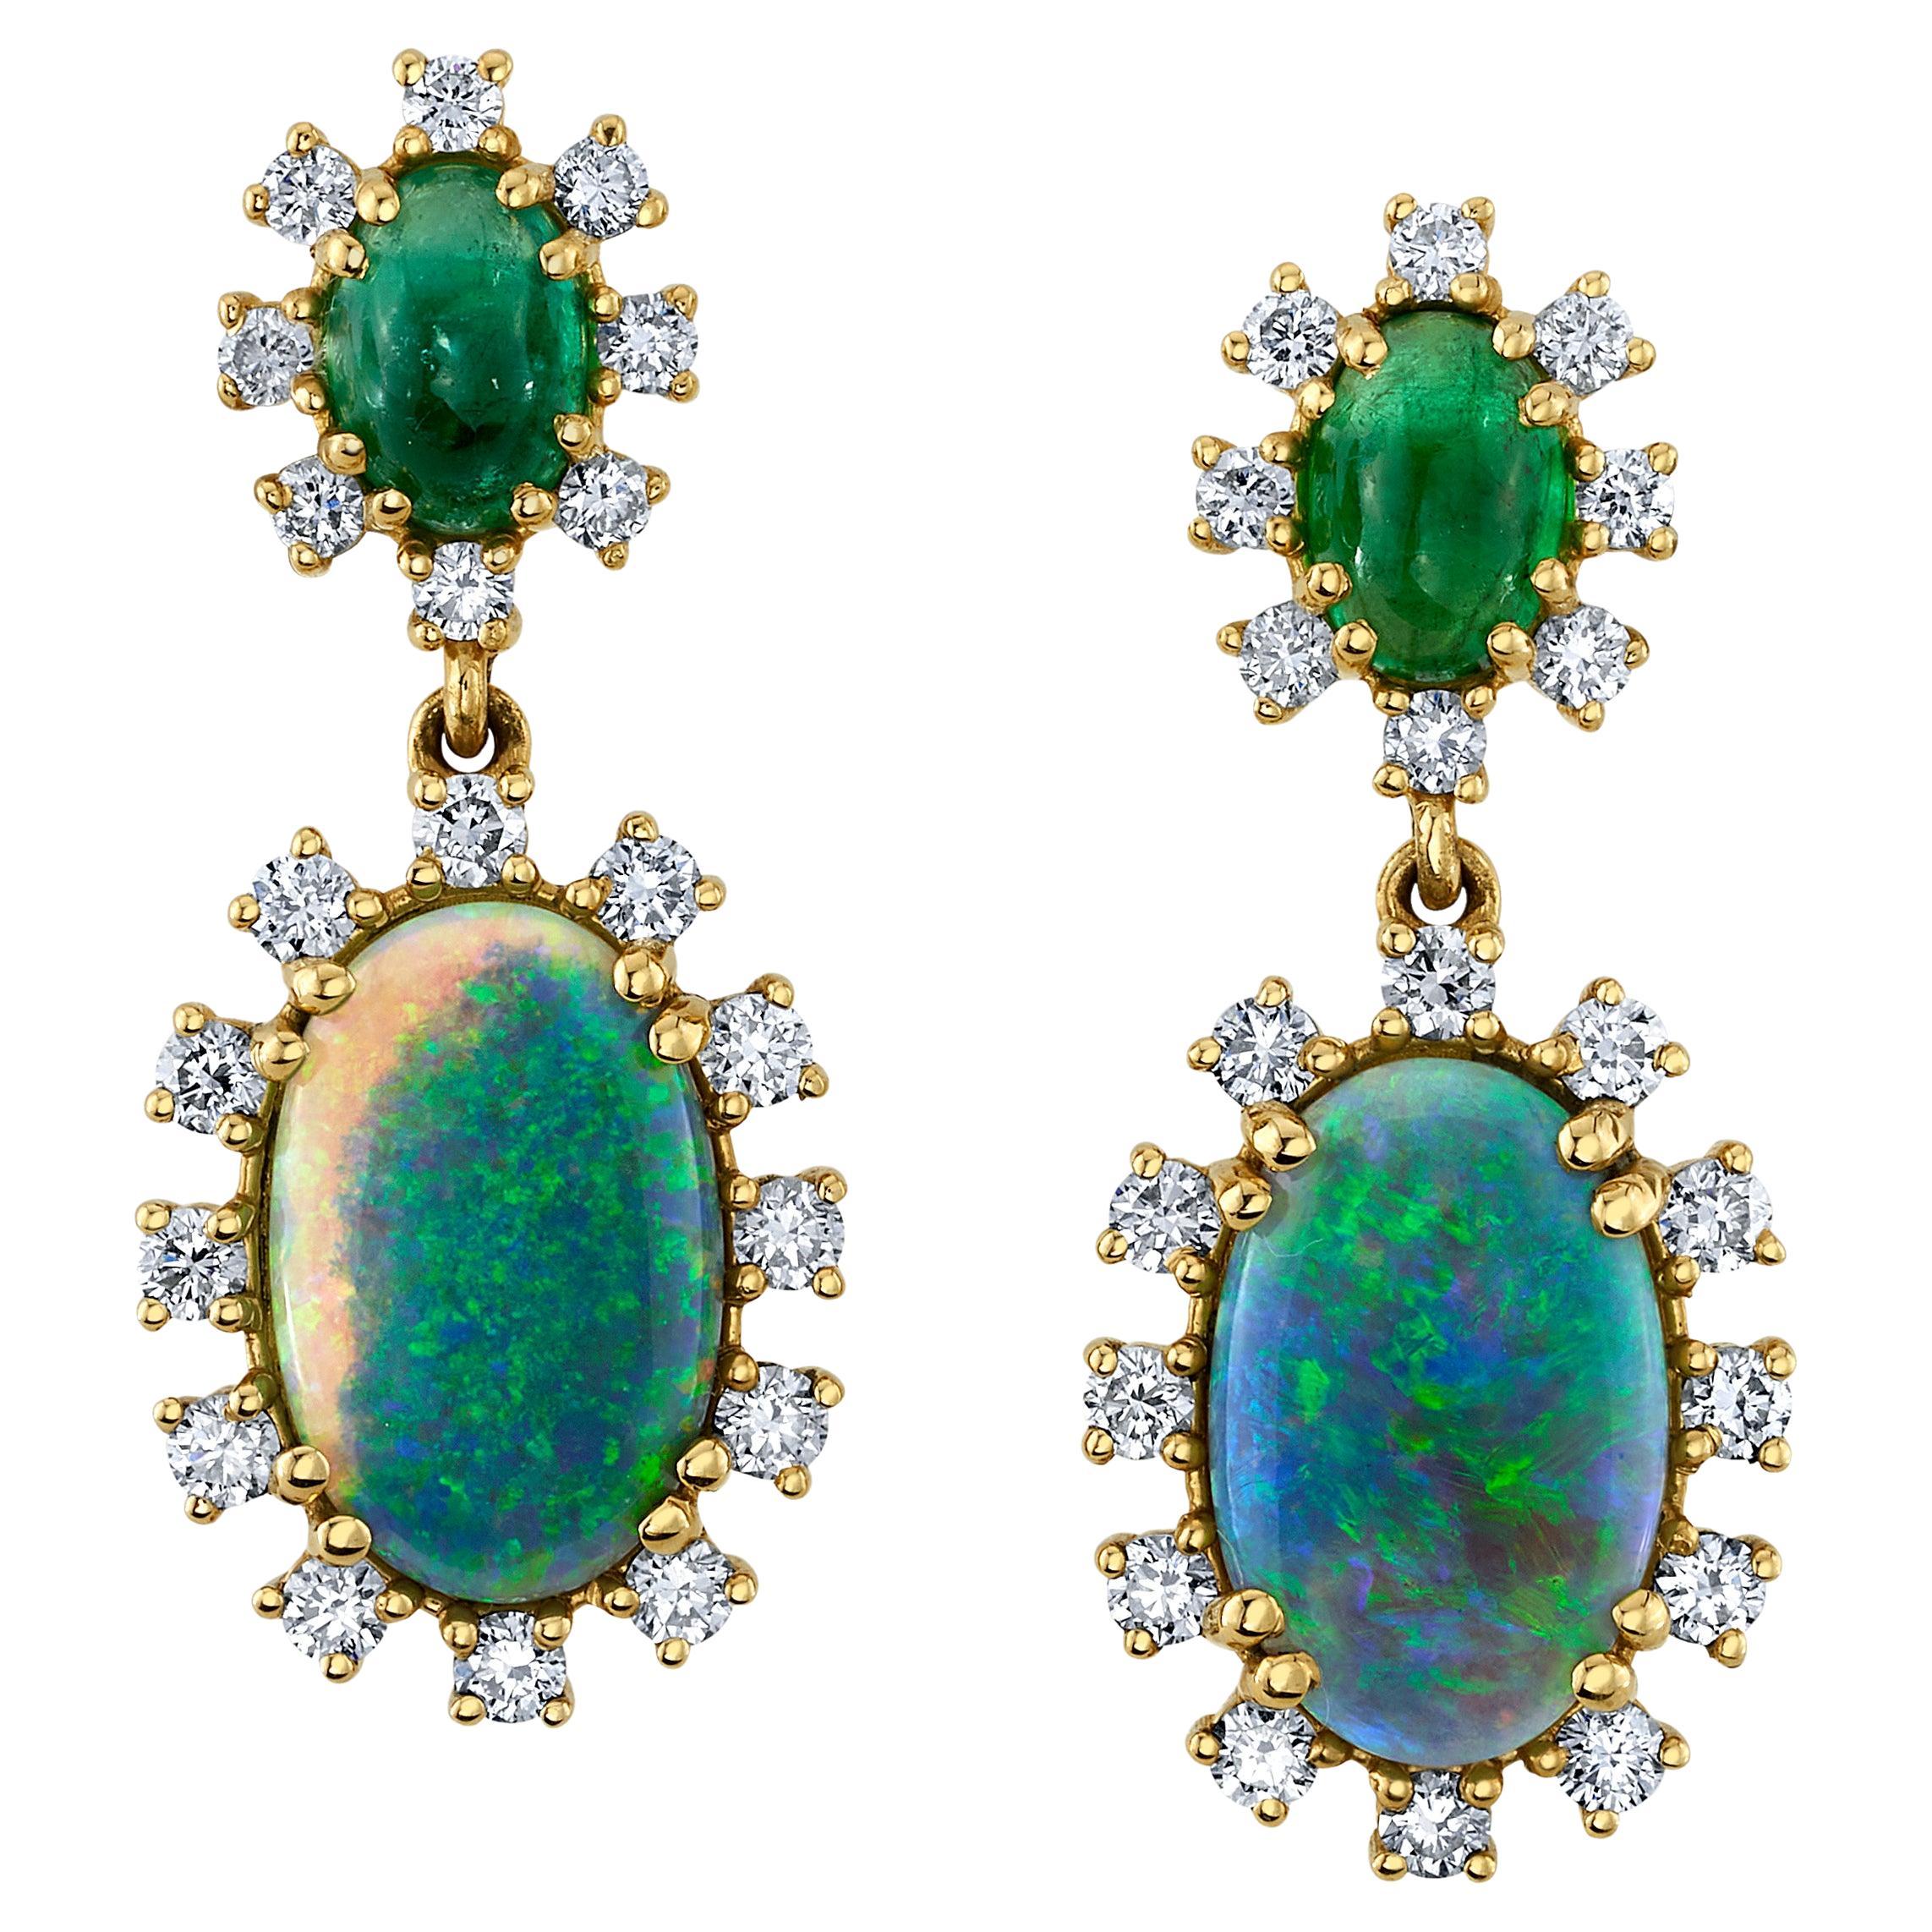 These black opal and emerald earrings will elevate any outfit with elegance and style! A beautifully matched pair of black opals are framed with sparking diamonds in these handcrafted 18k yellow gold earrings. The opals dangle beneath a pair of